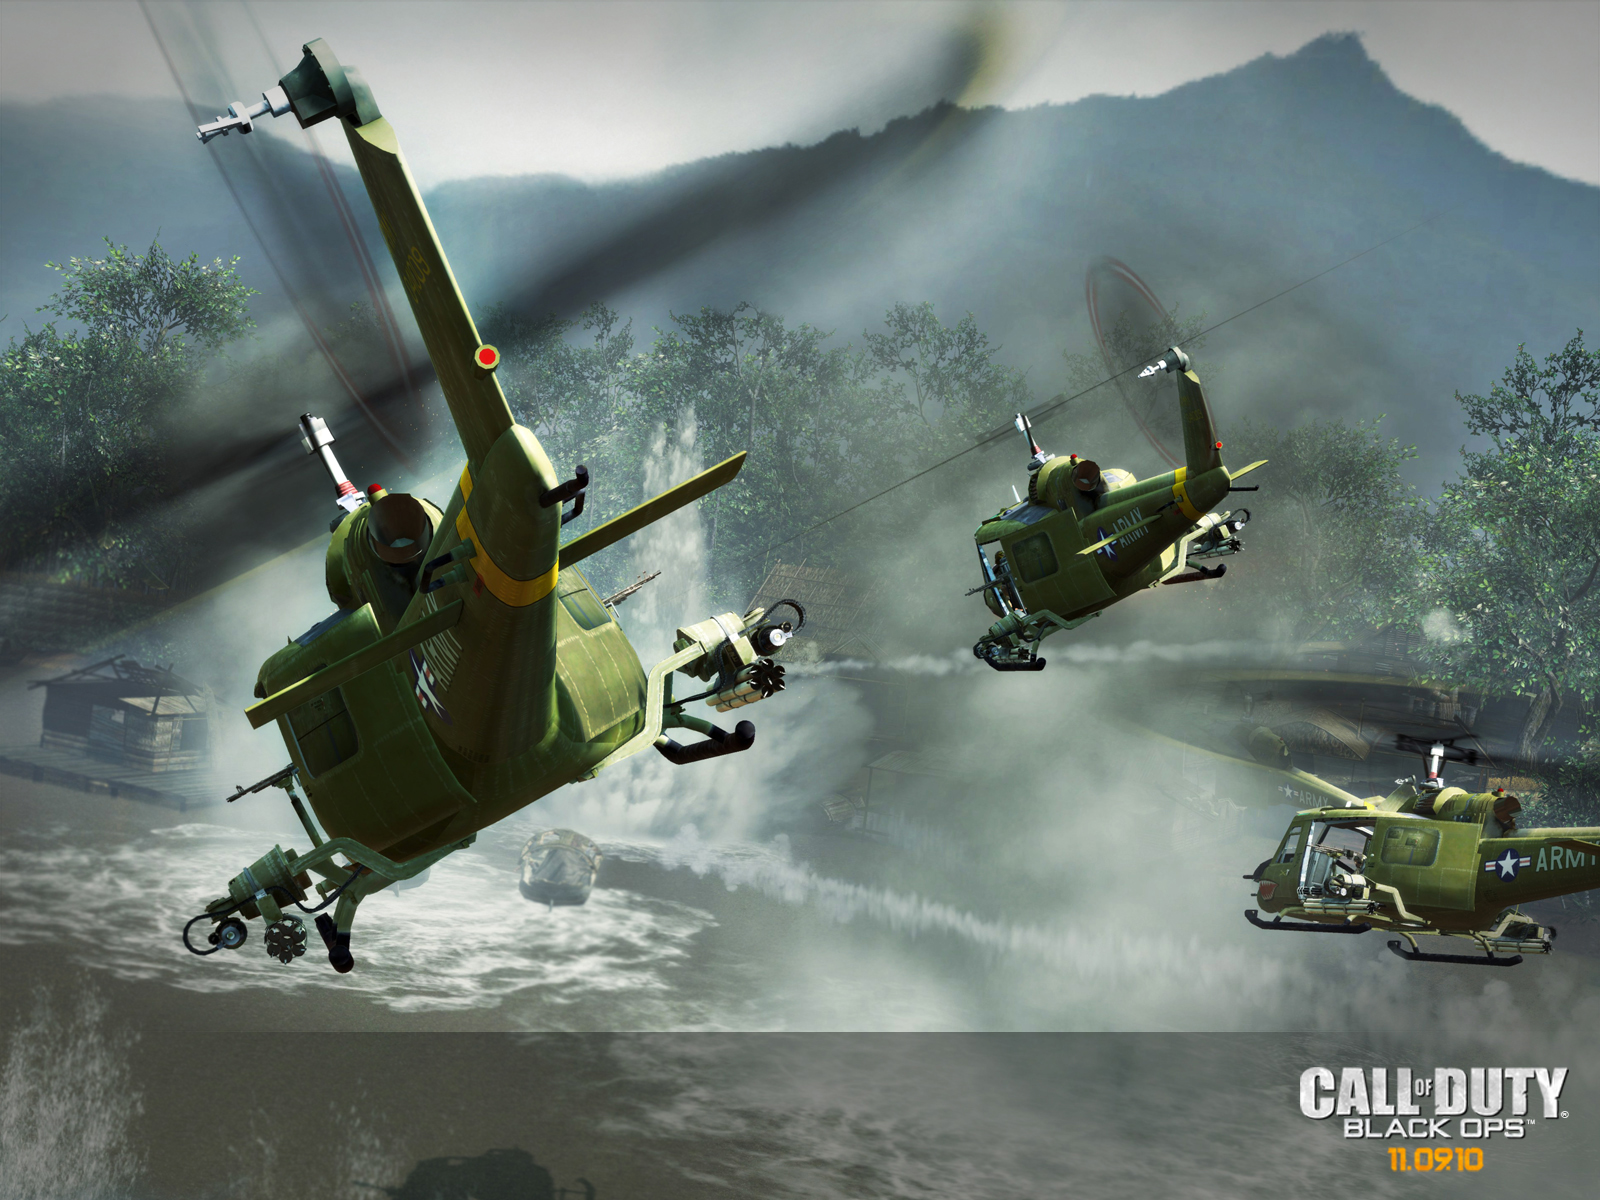 Wallpapers Call of duty black ops